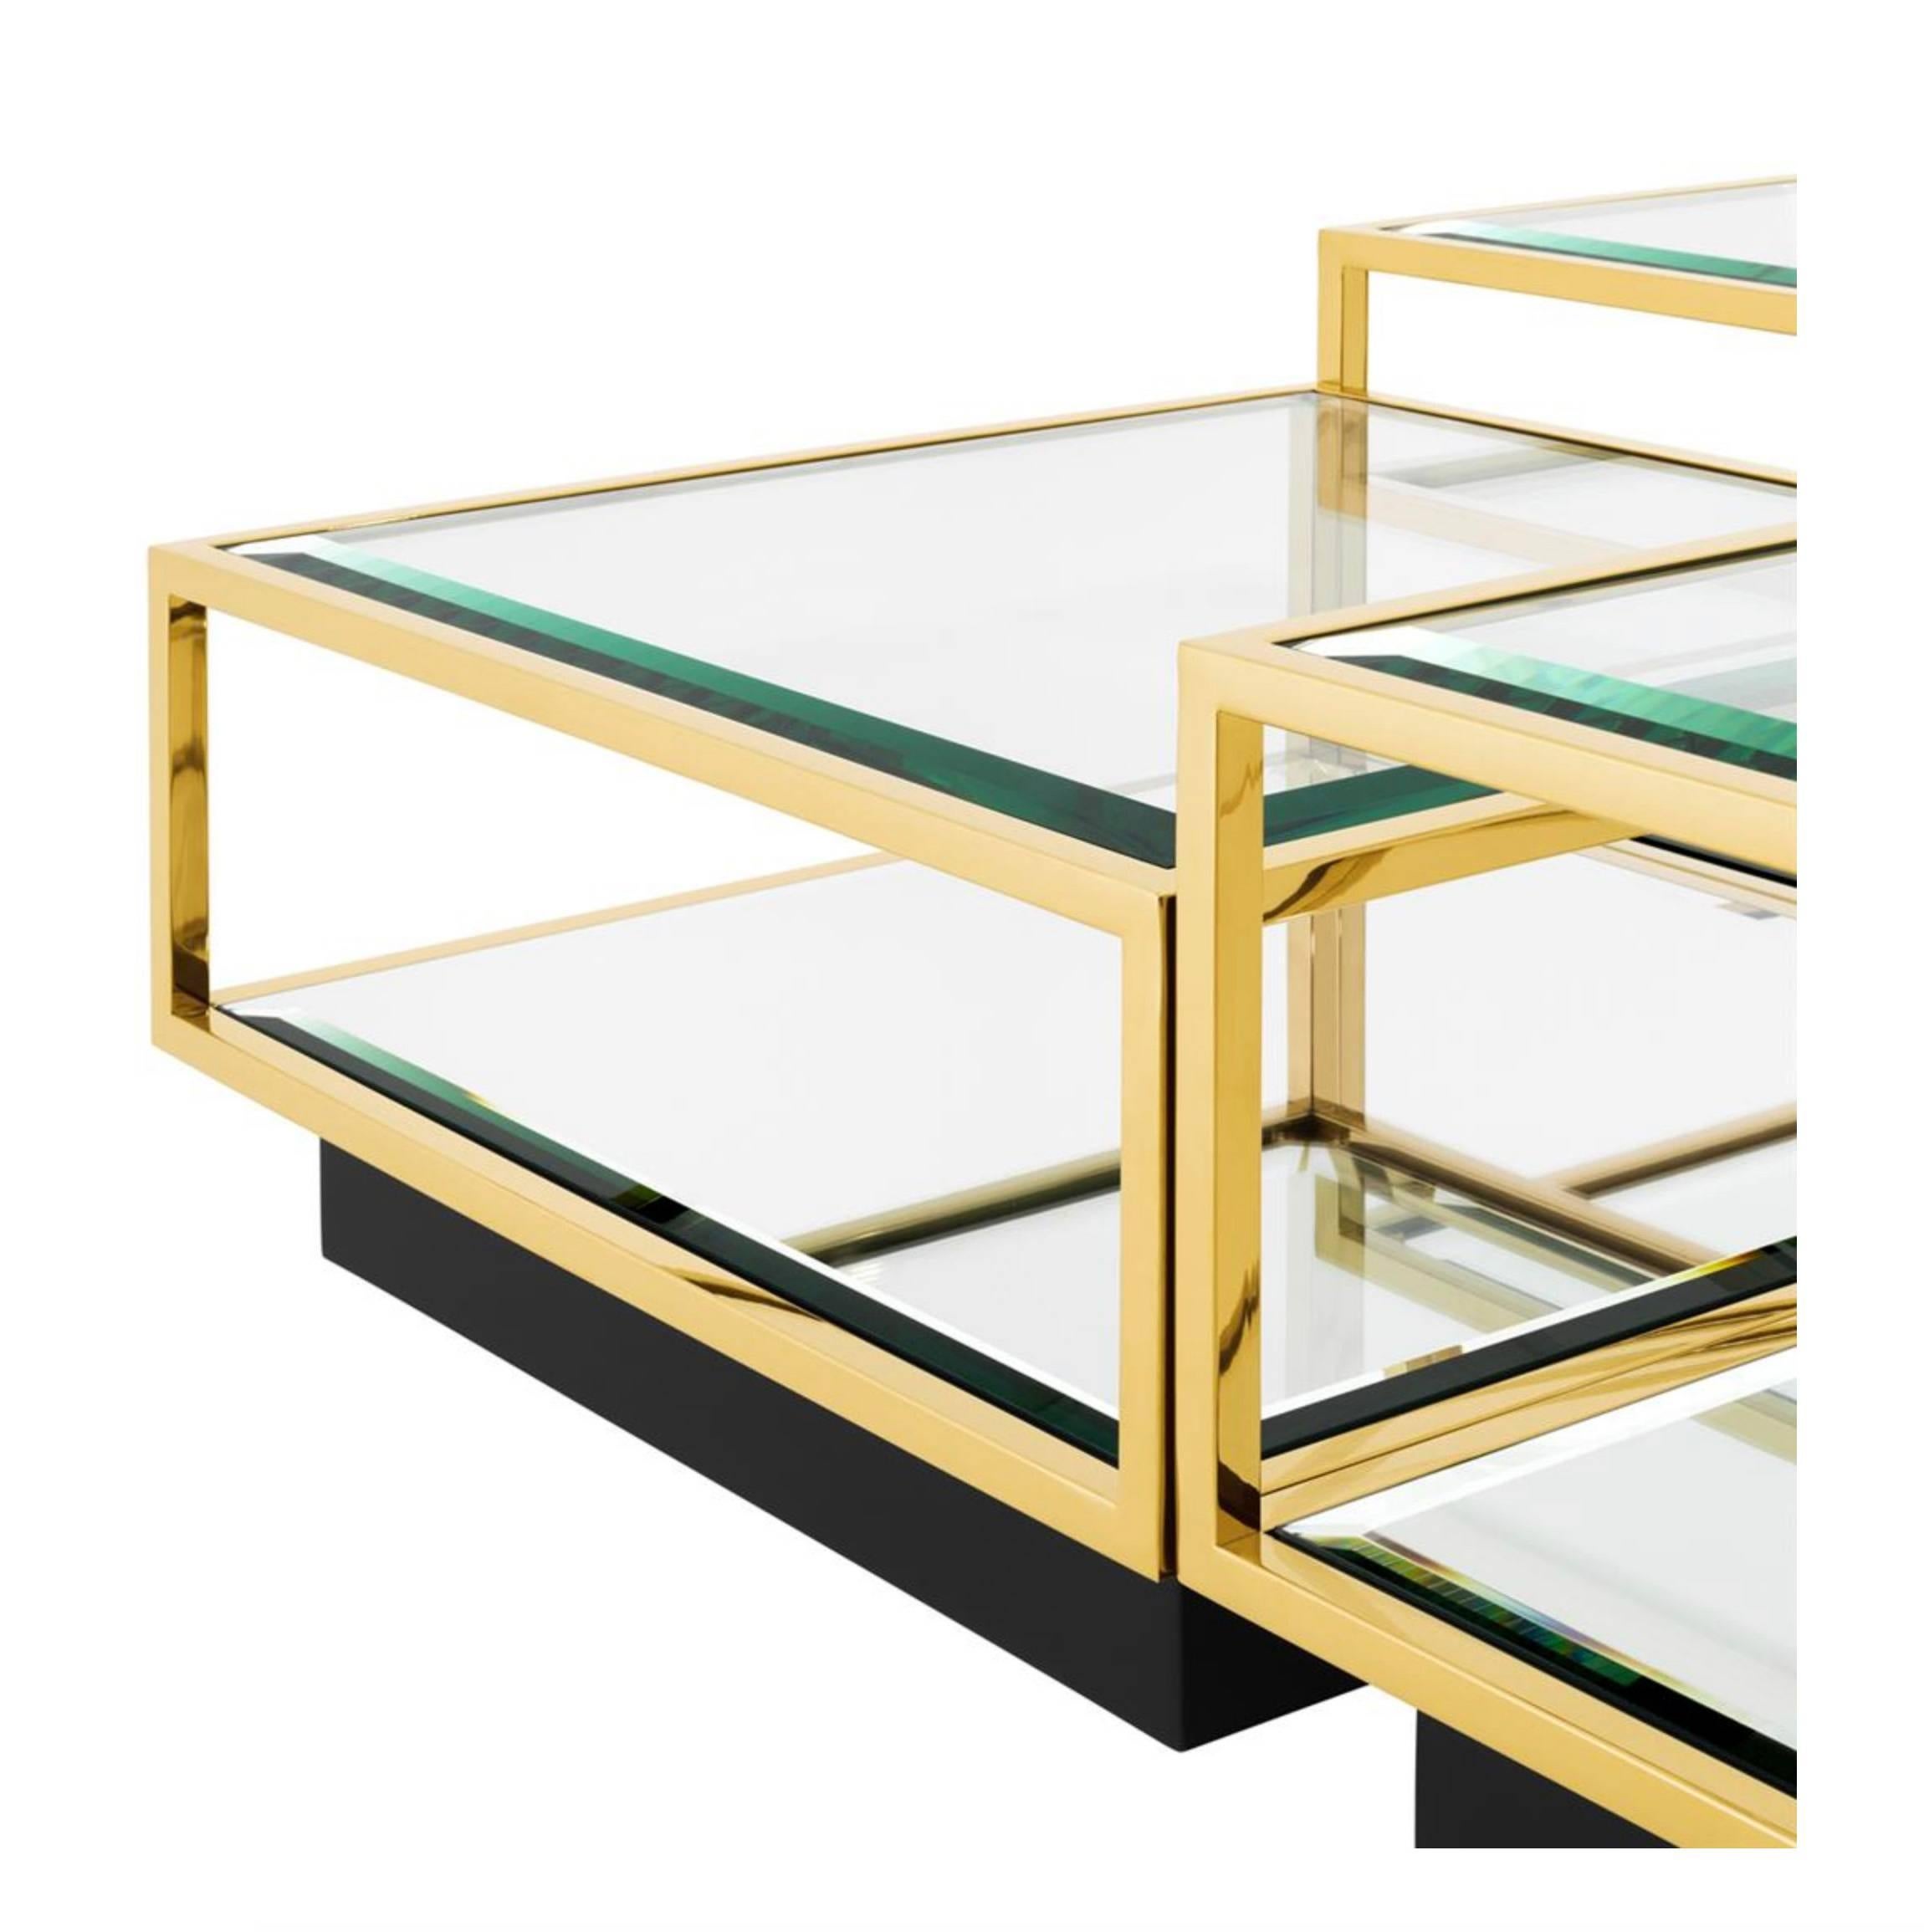 Set of four metal tables with beveled glass tops and beveled mirrored glass on base. Gold finish on metal. Clean and elegant coffee table option for large room.

Measurements: 13" H x 26" W x 26" D
 15.5" H x 26" W x